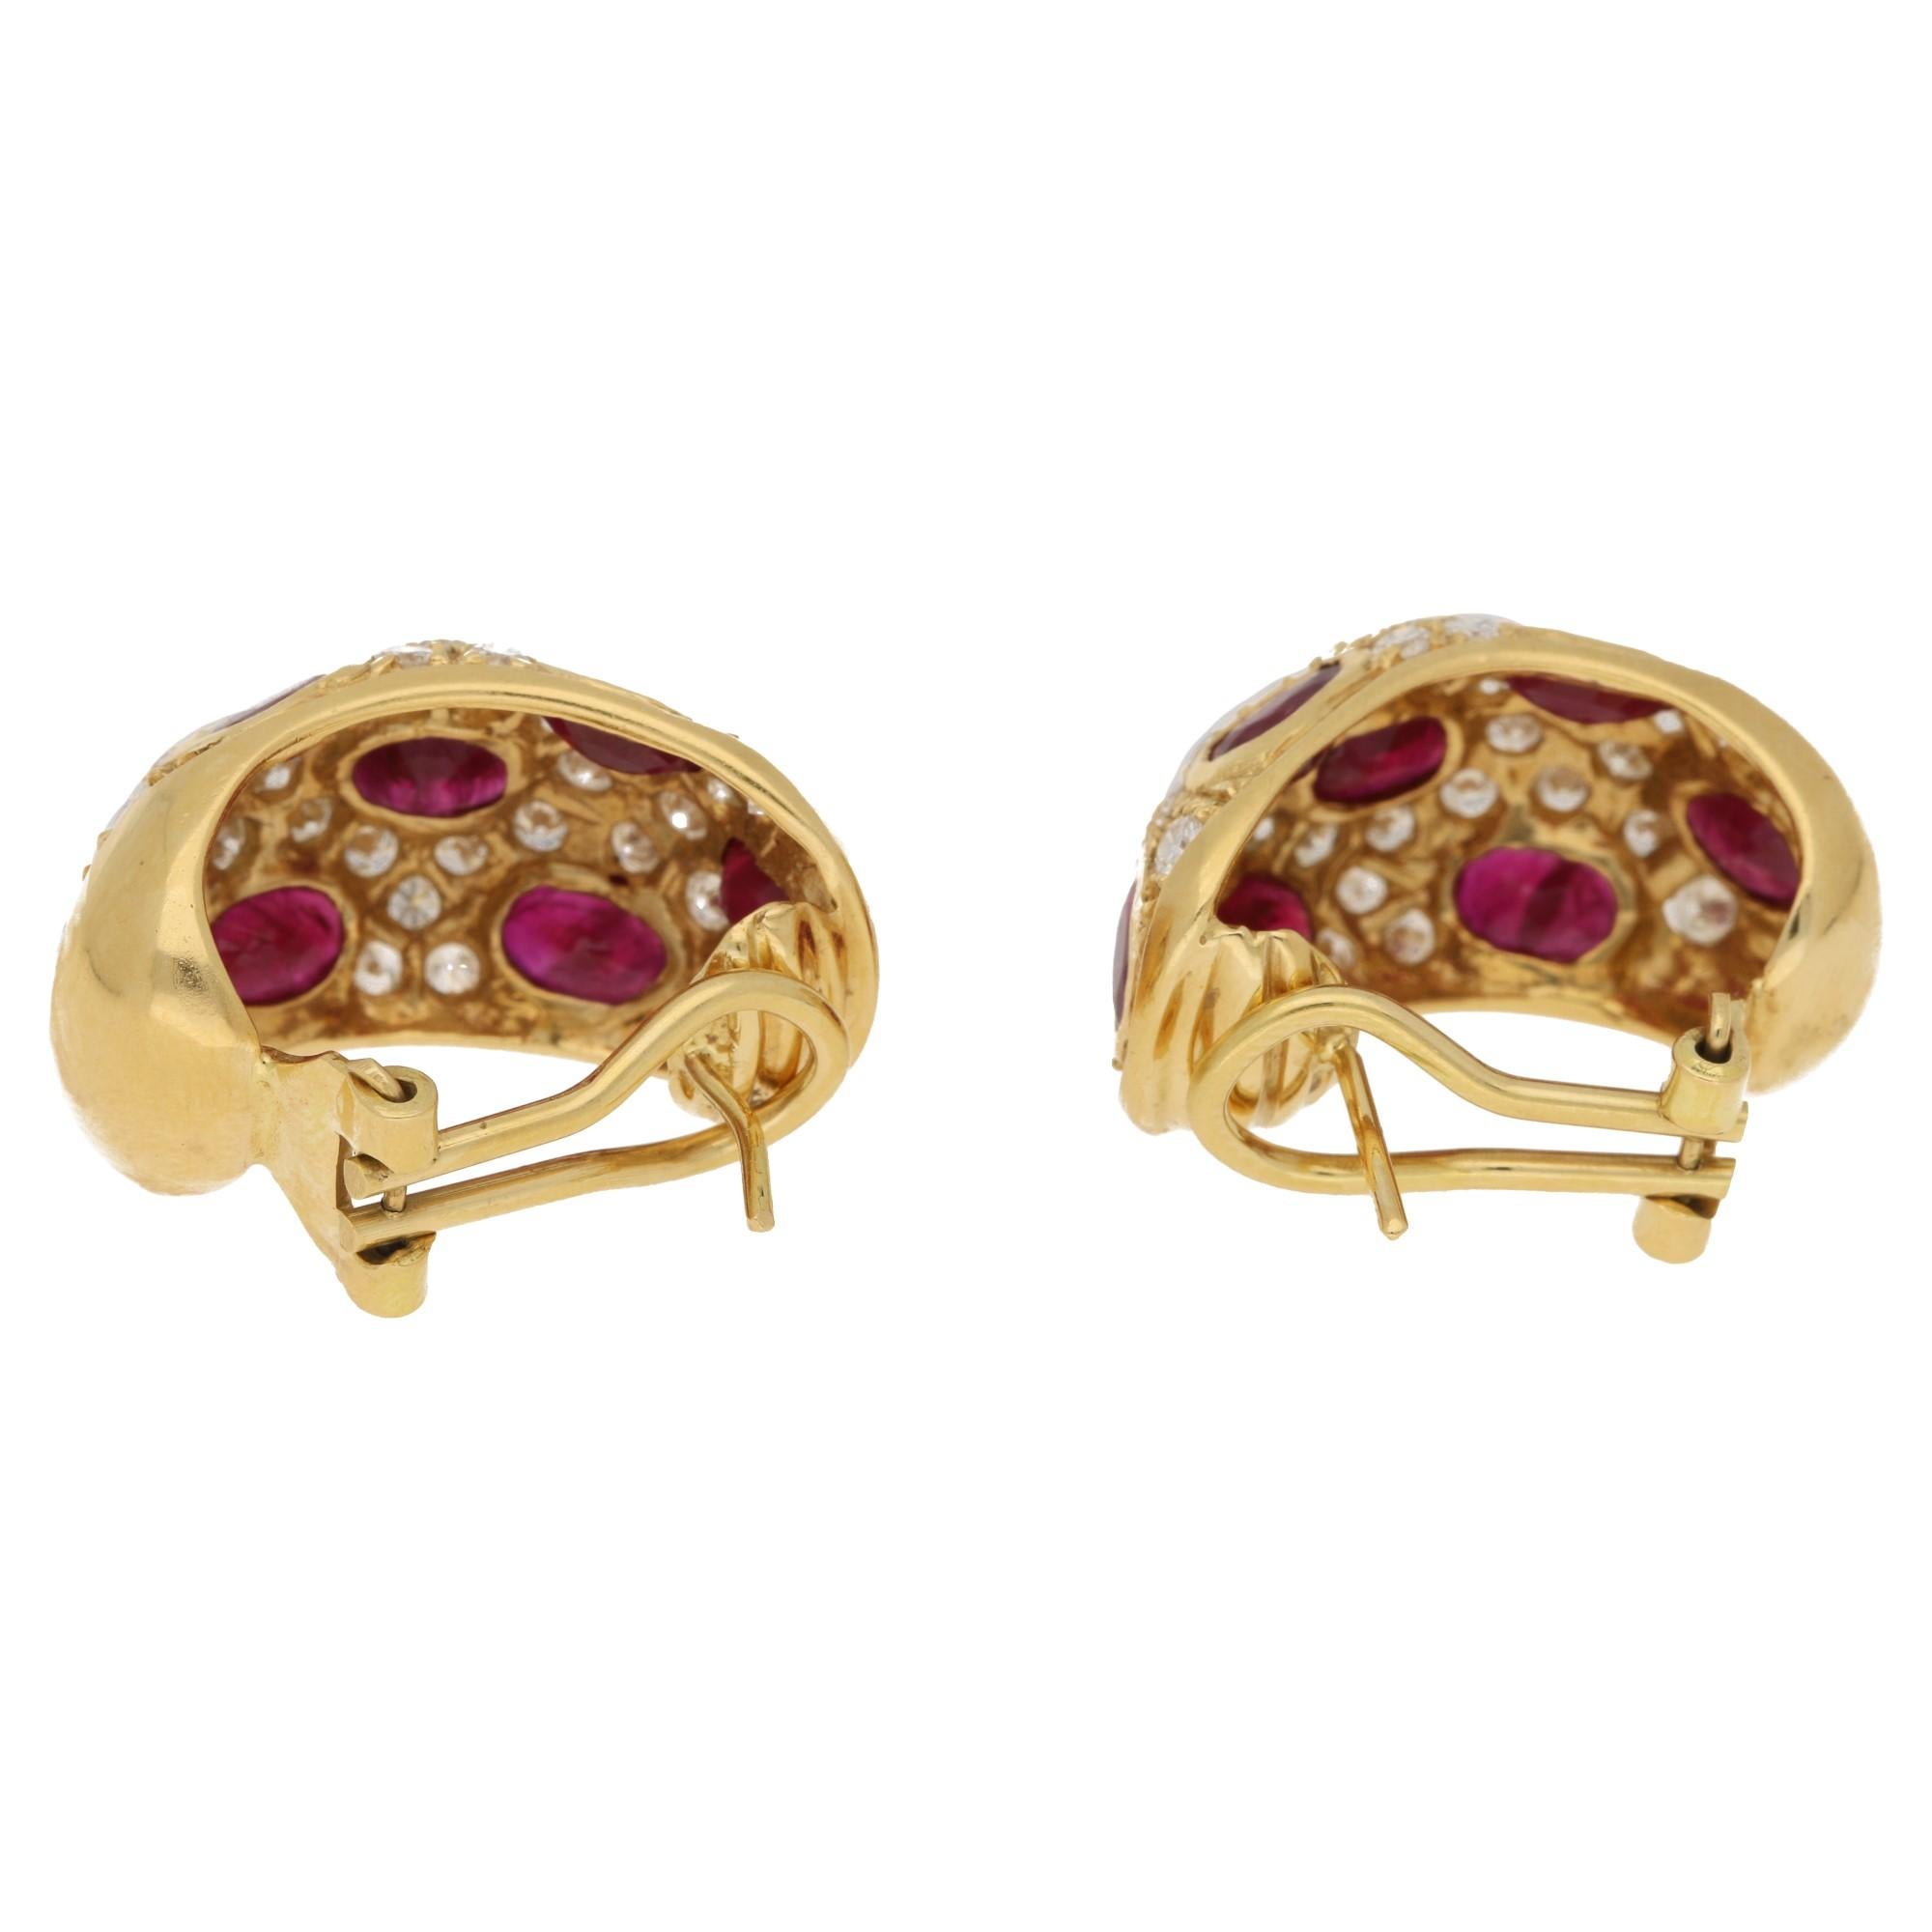 A stylish pair of 1970's ruby and diamond earrings. Each earring is formed of seven oval cut rubies, uniform in colour, in a yellow gold rub over setting.  The rubies are interspersed with thirty round brilliant cut diamonds in a yellow gold